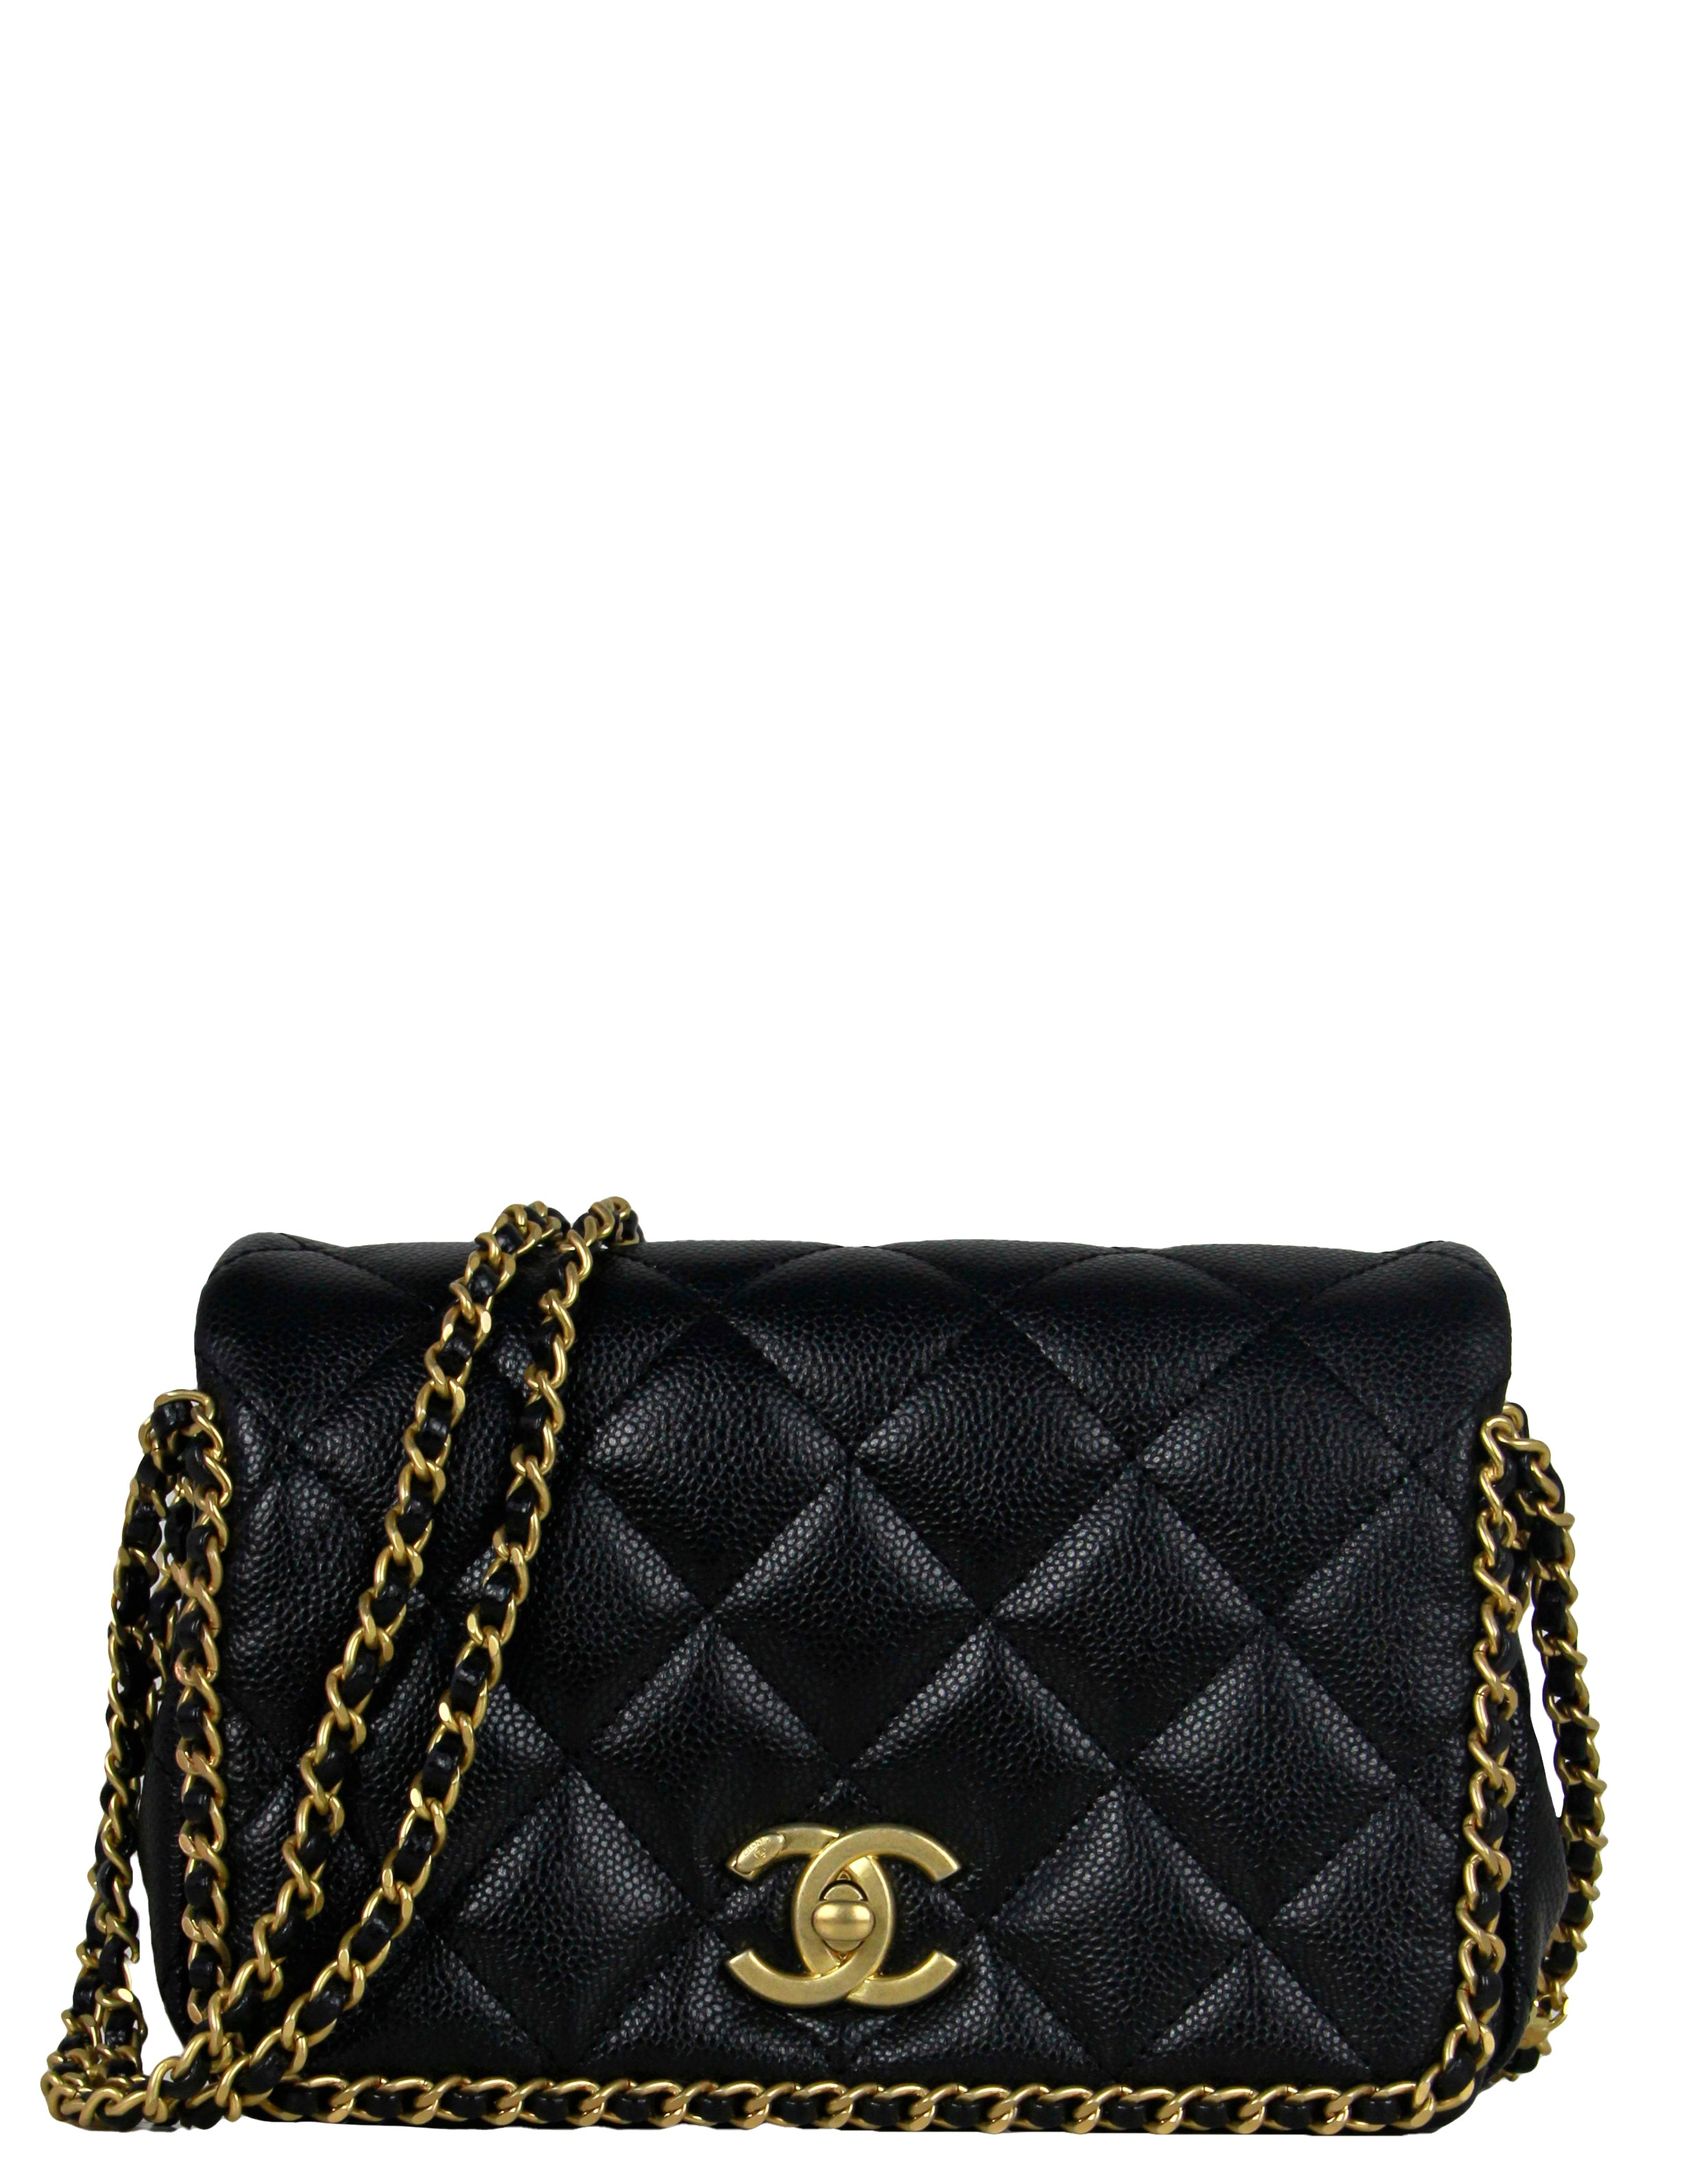 Black caviar mini flap with adjustable chain and heart on CC! : r/chanel